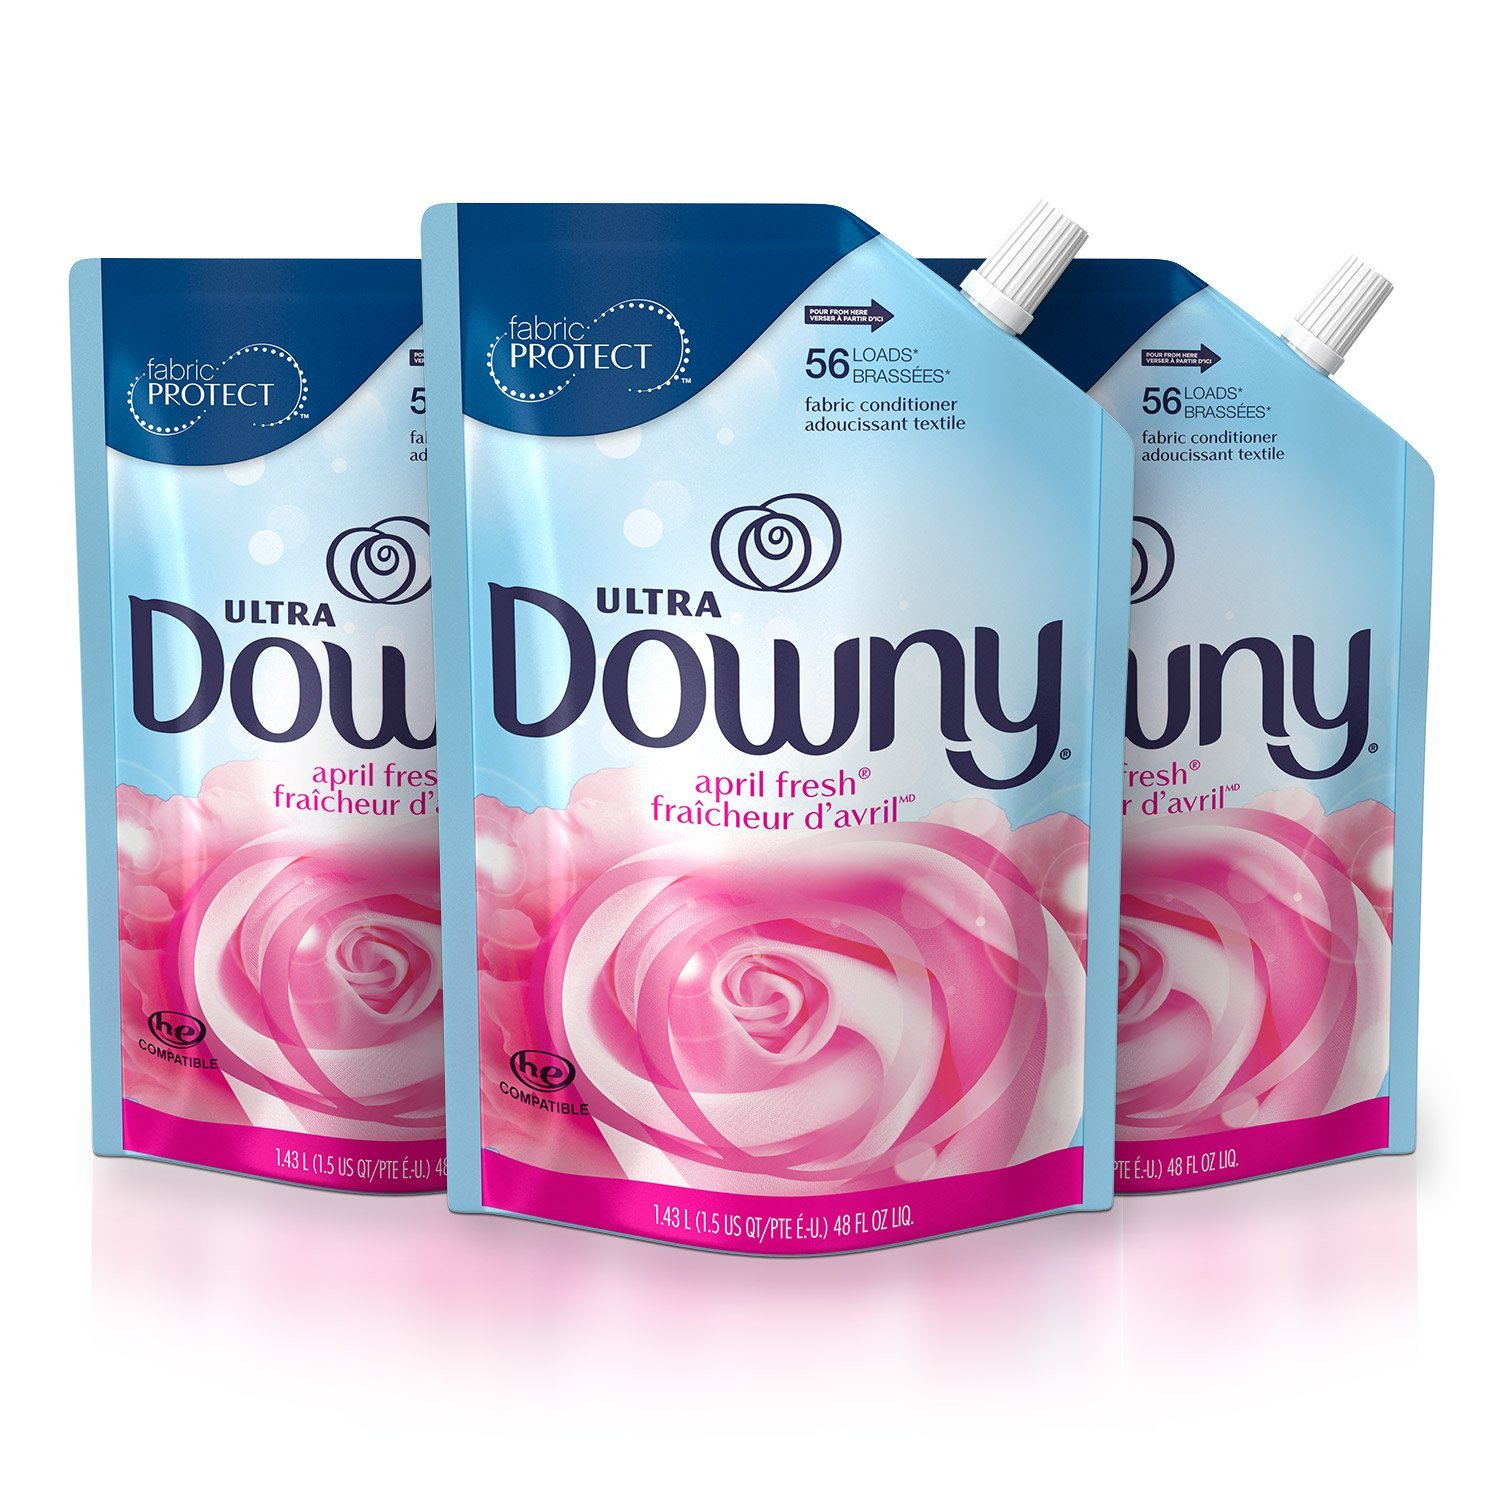 Primary image for Downy Ultra Liquid Fabric Softener Conditioner, April Fresh, 48oz Pouch (3 Pack)